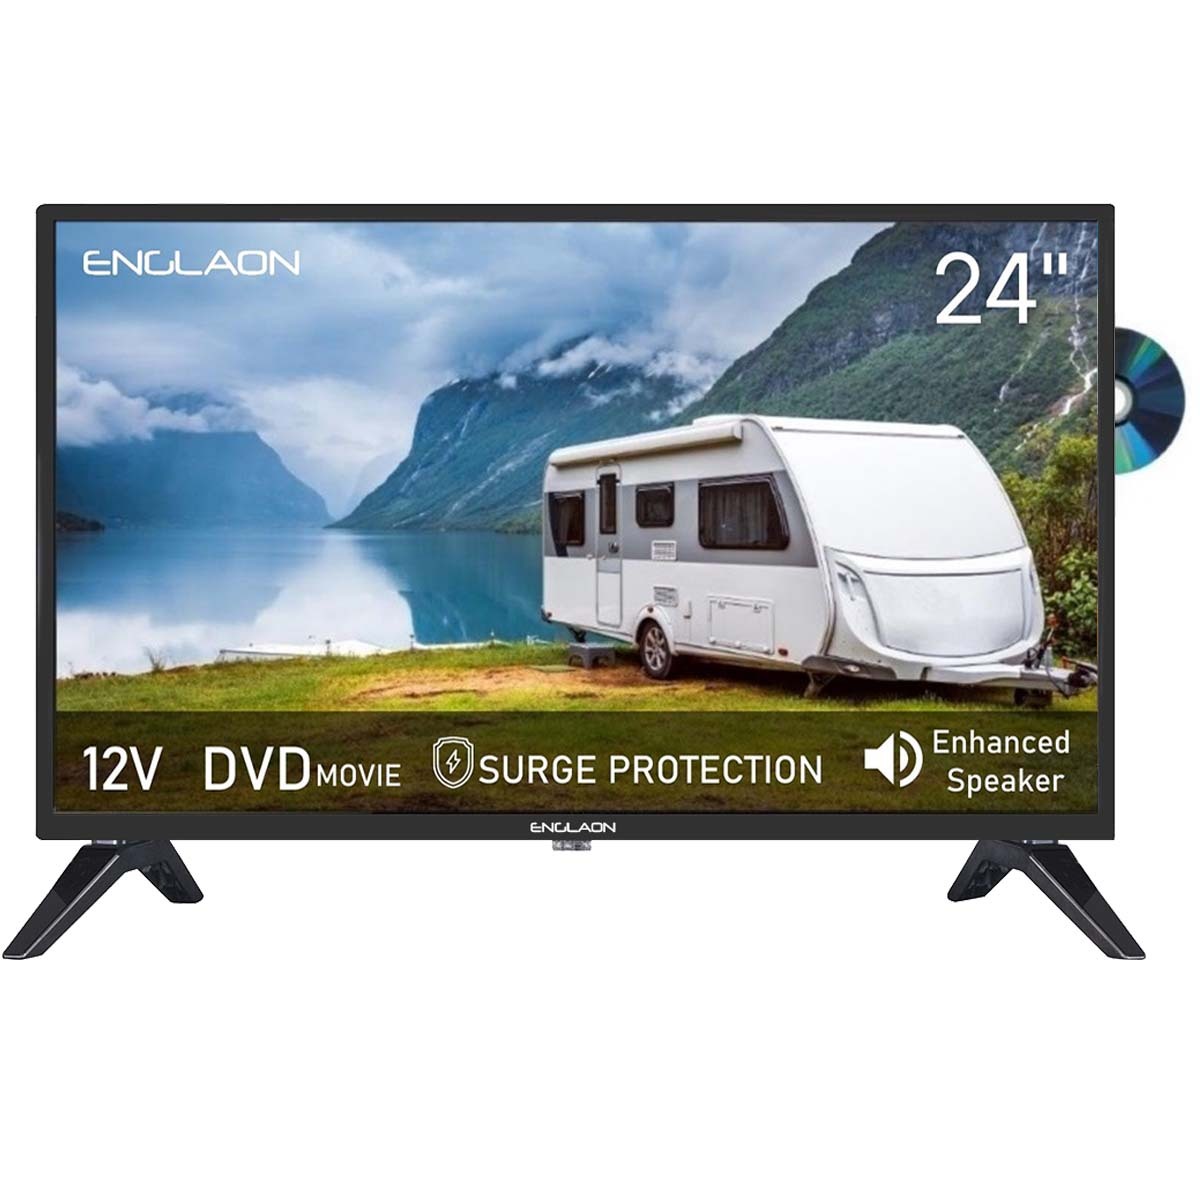 Engalaon 24″ HD LED 12V TV with Built-in DVD player